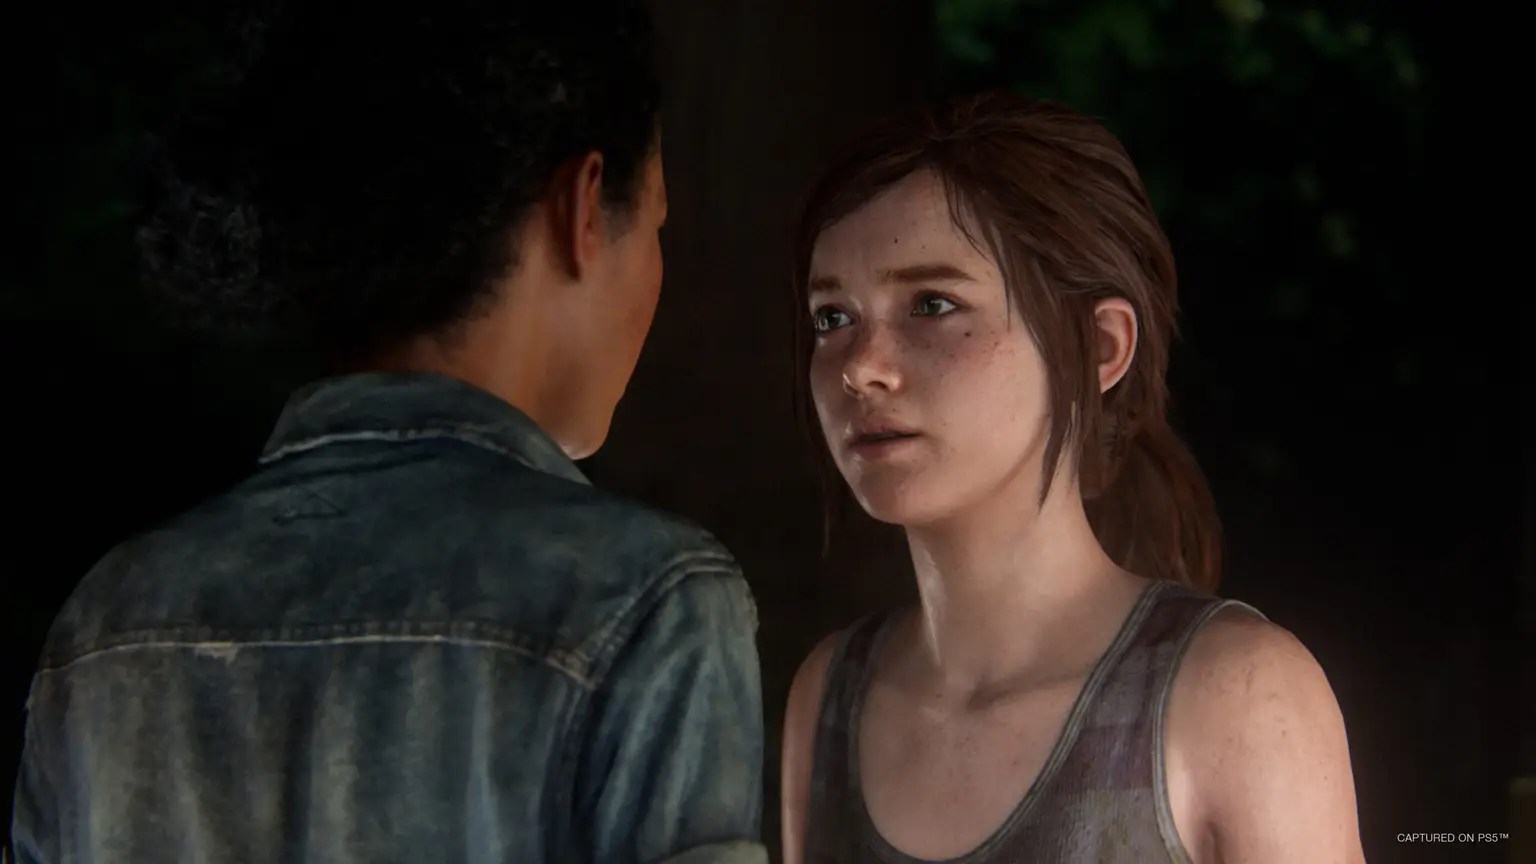 How The Last of Us Became the Best Video Game Adaptation Ever - Green Man  Gaming Blog